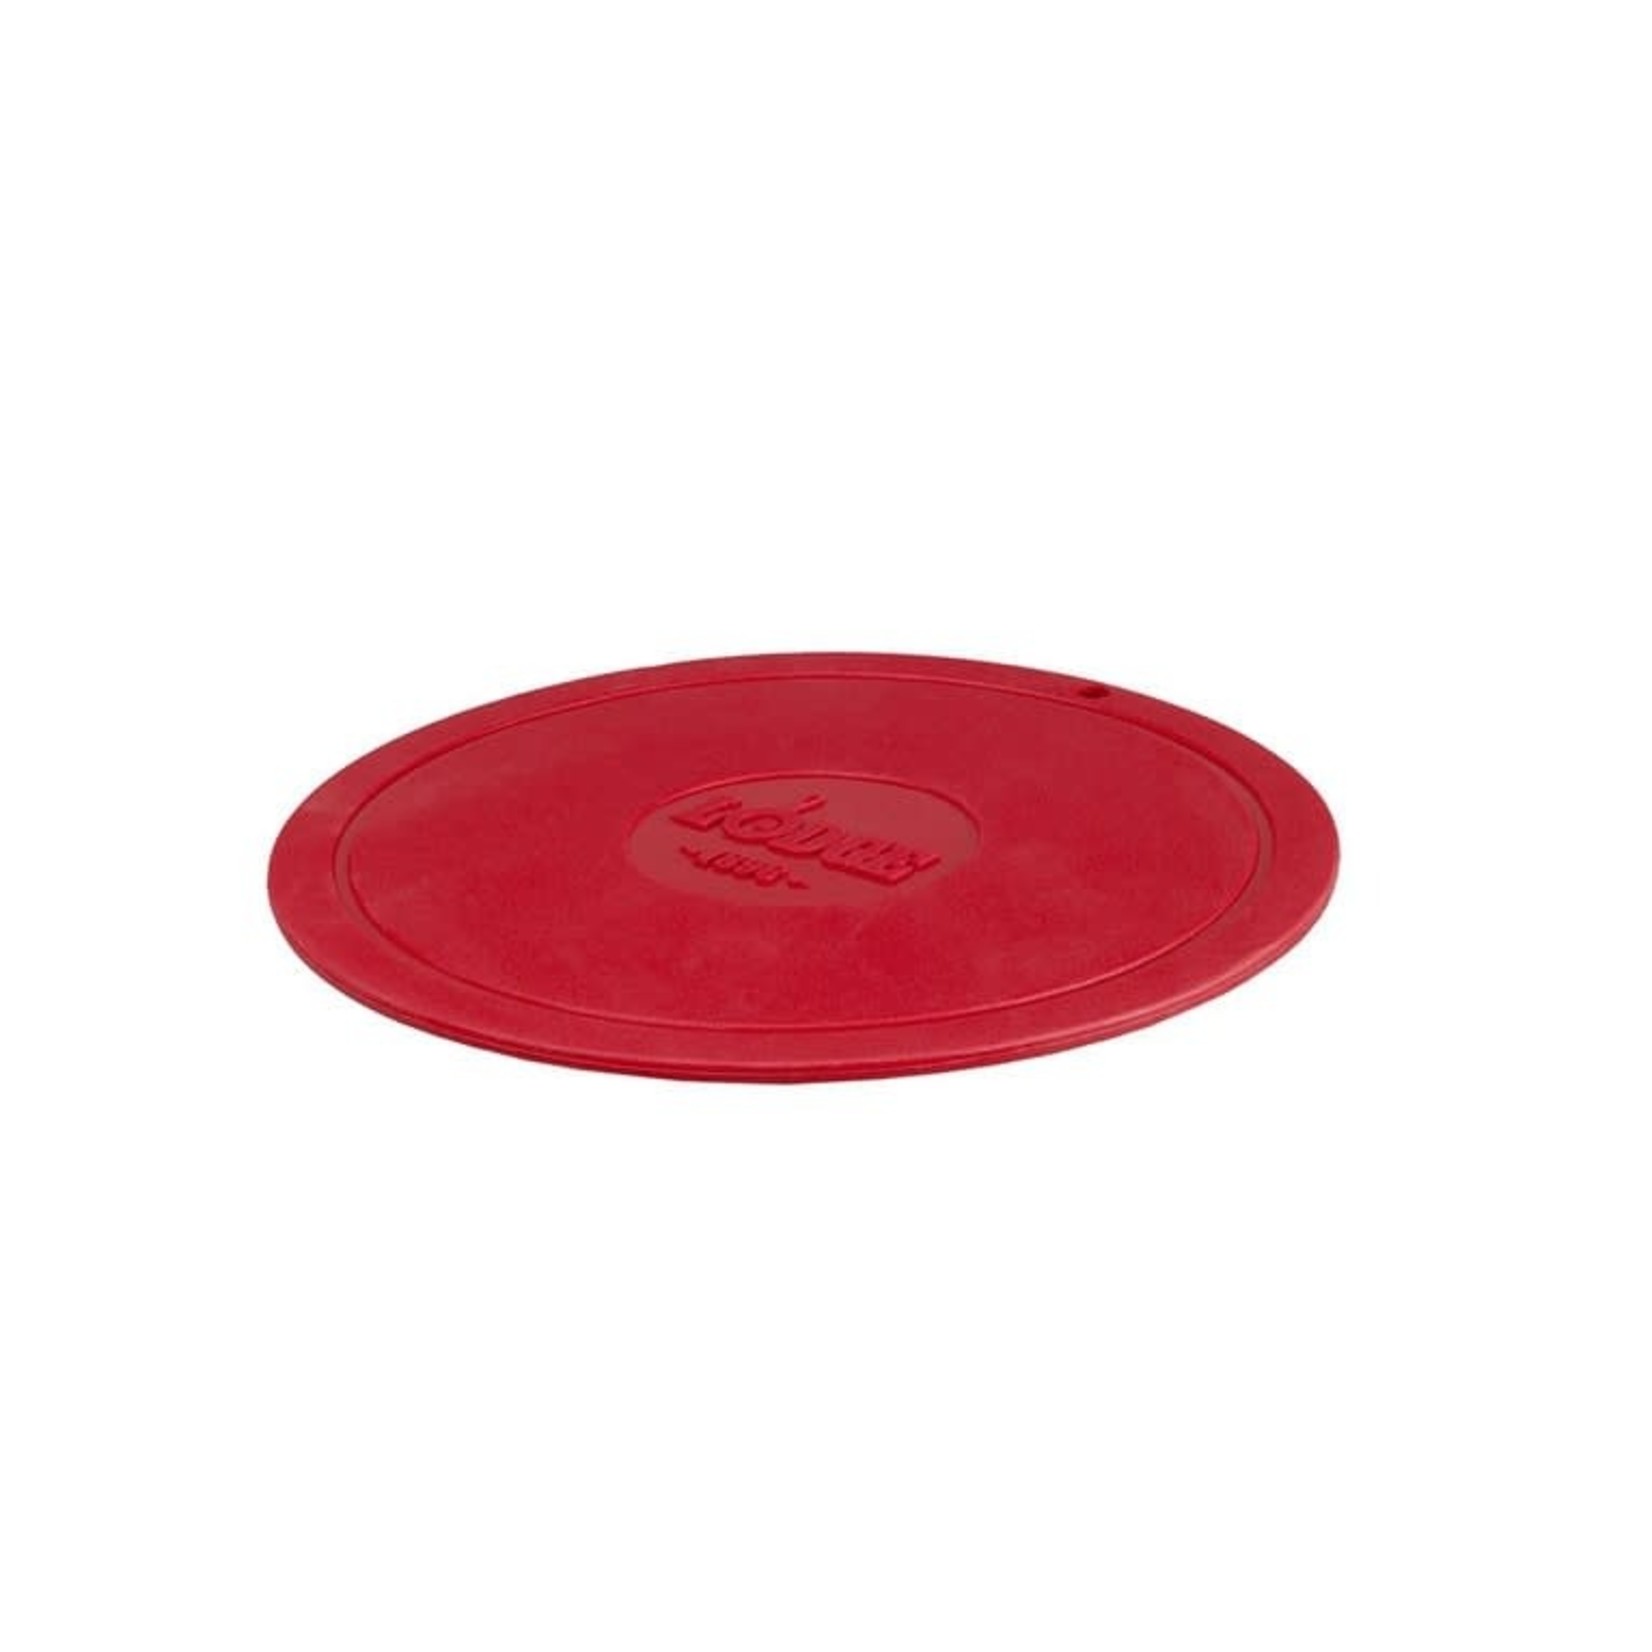 LODGE LODGE Deluxe Silicone Trivet - Red